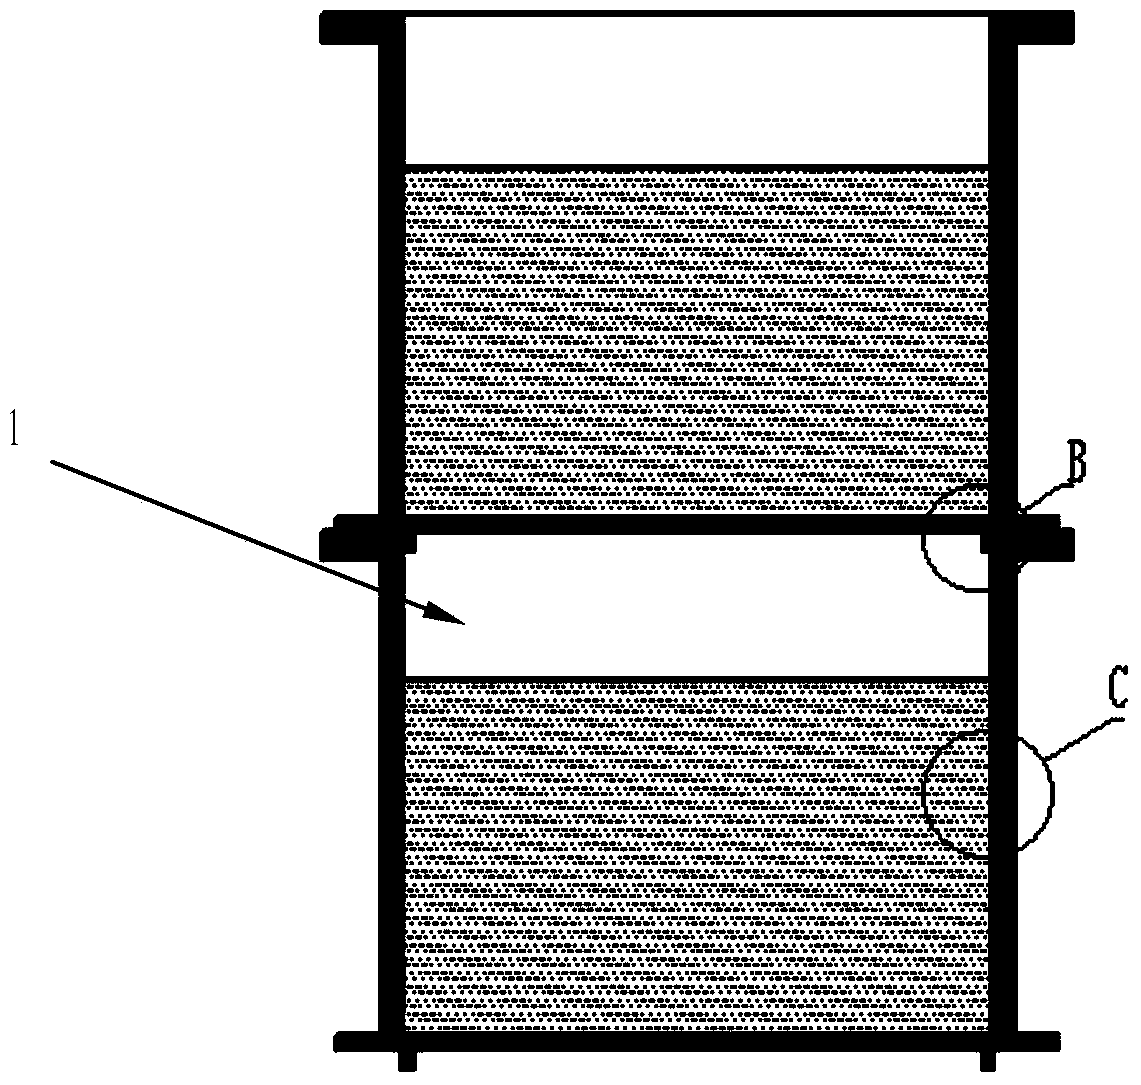 Waterlogged sponge energy absorption and vibration attenuation device